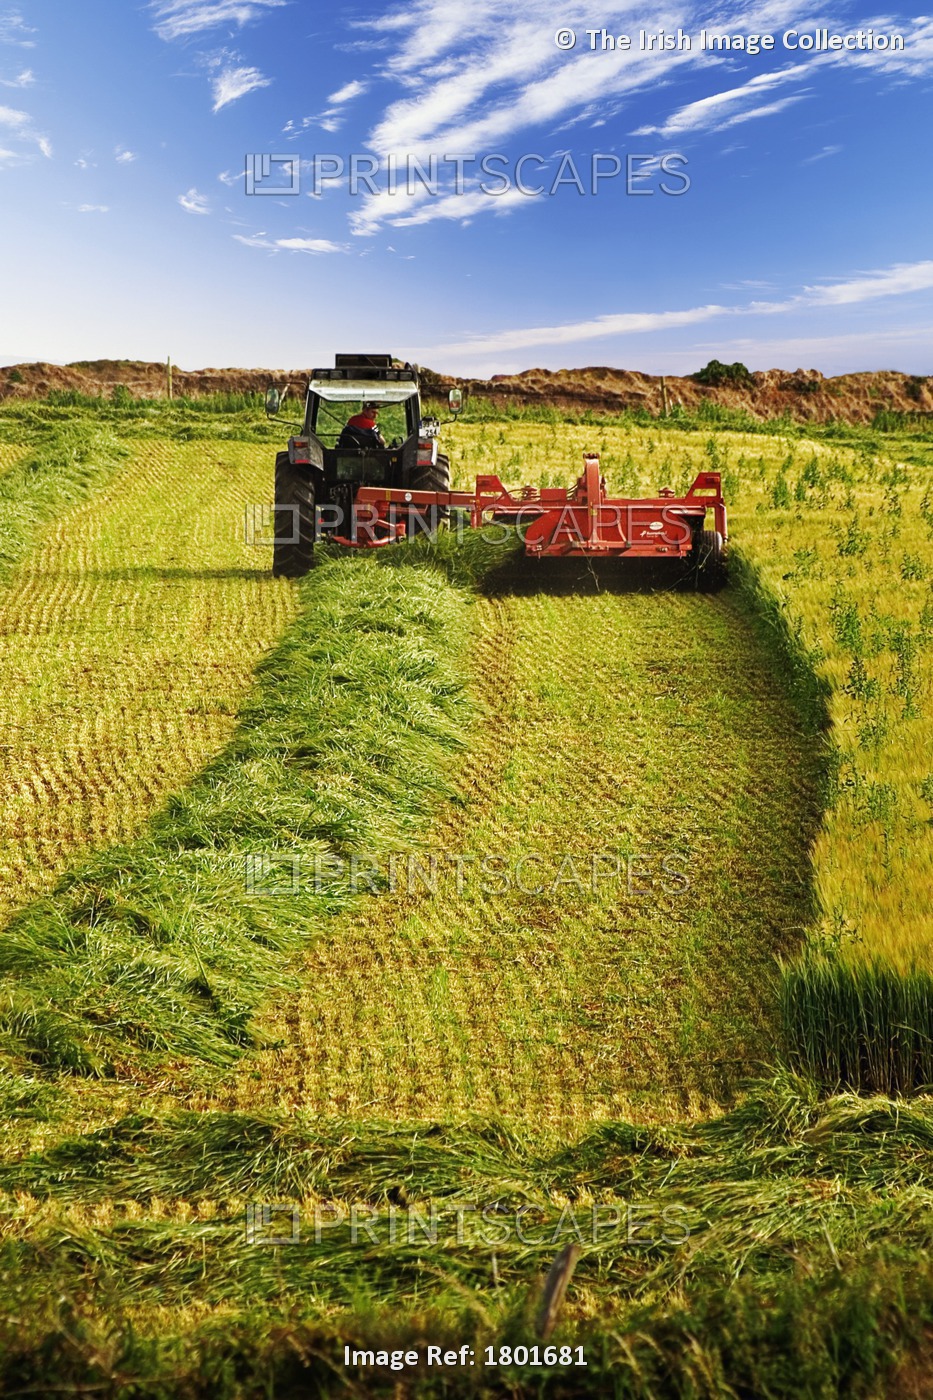 Co Waterford, Ireland; Silage Cutting